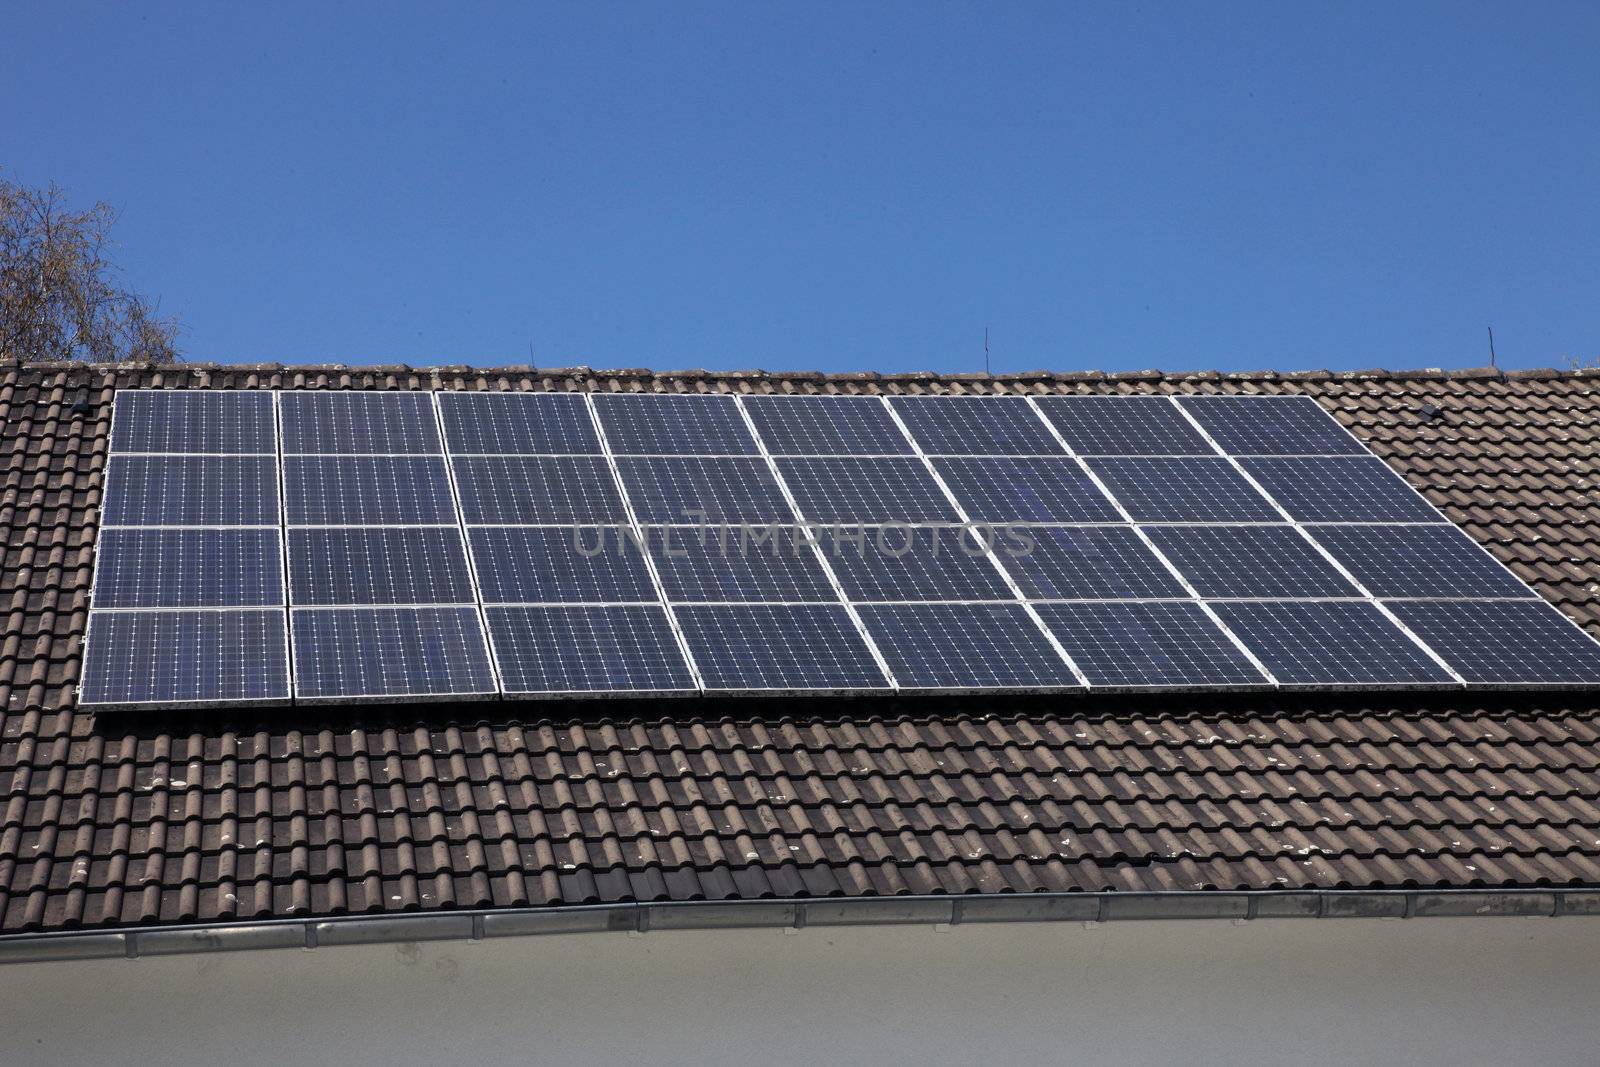 An array of photovoltaic solar panels mounted on a house roof to supply renewable domestic electricity by converting the radiant energy of the sun